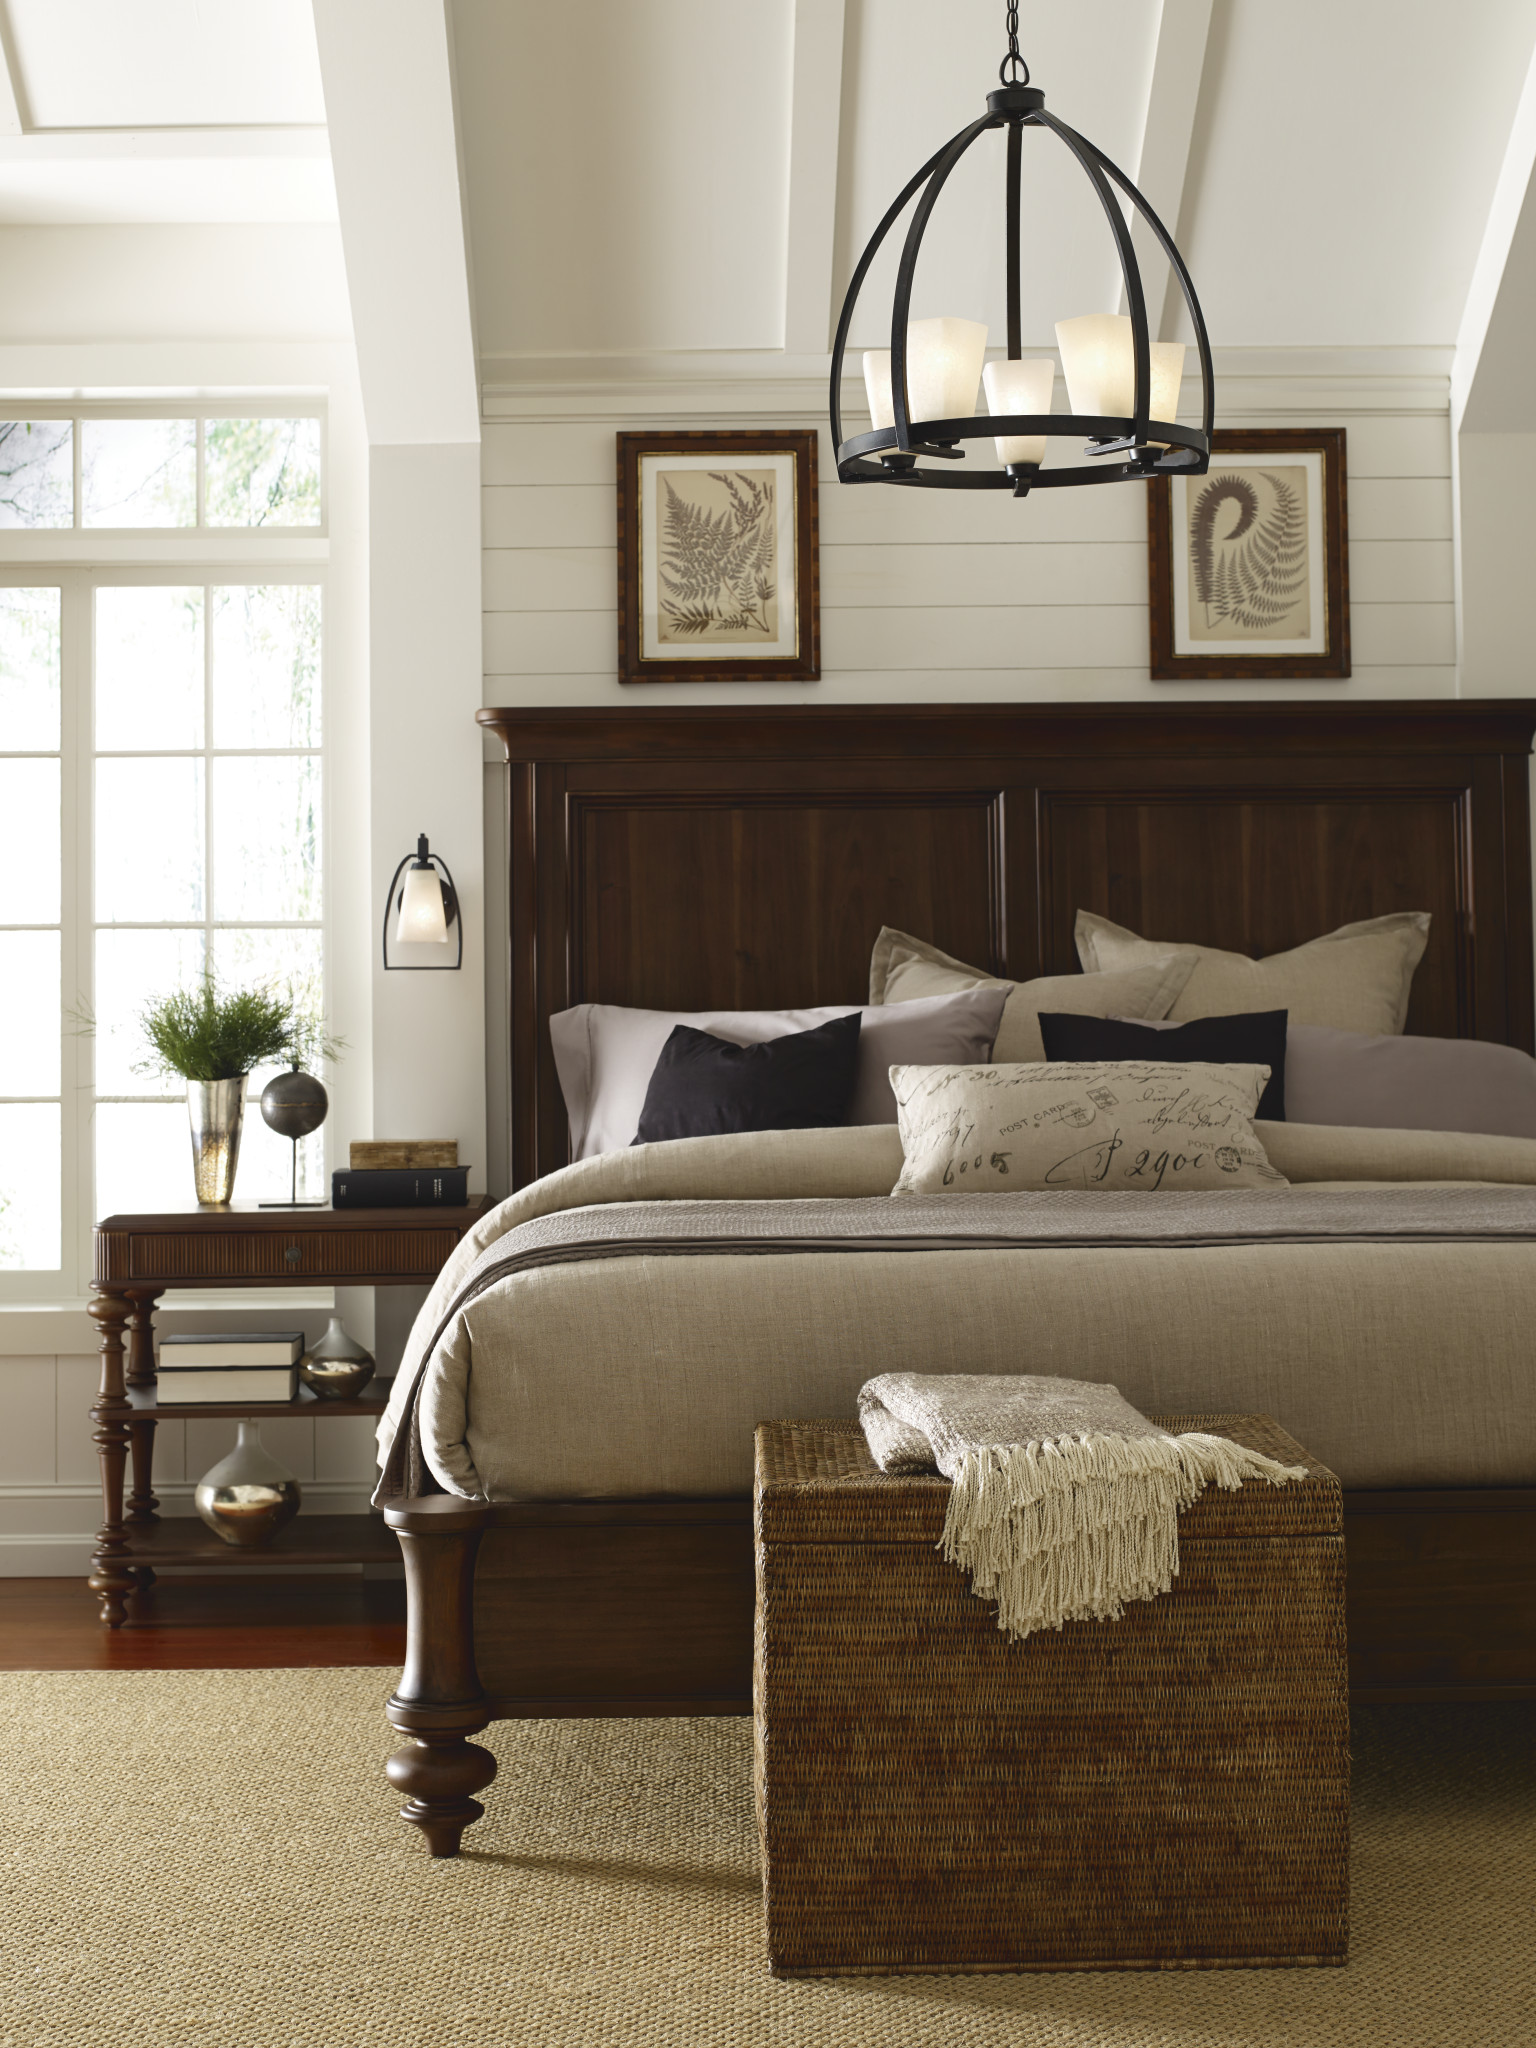 Rustic Industrial Bedroom
 Illuminate your rustic industrial chic bedroom with a